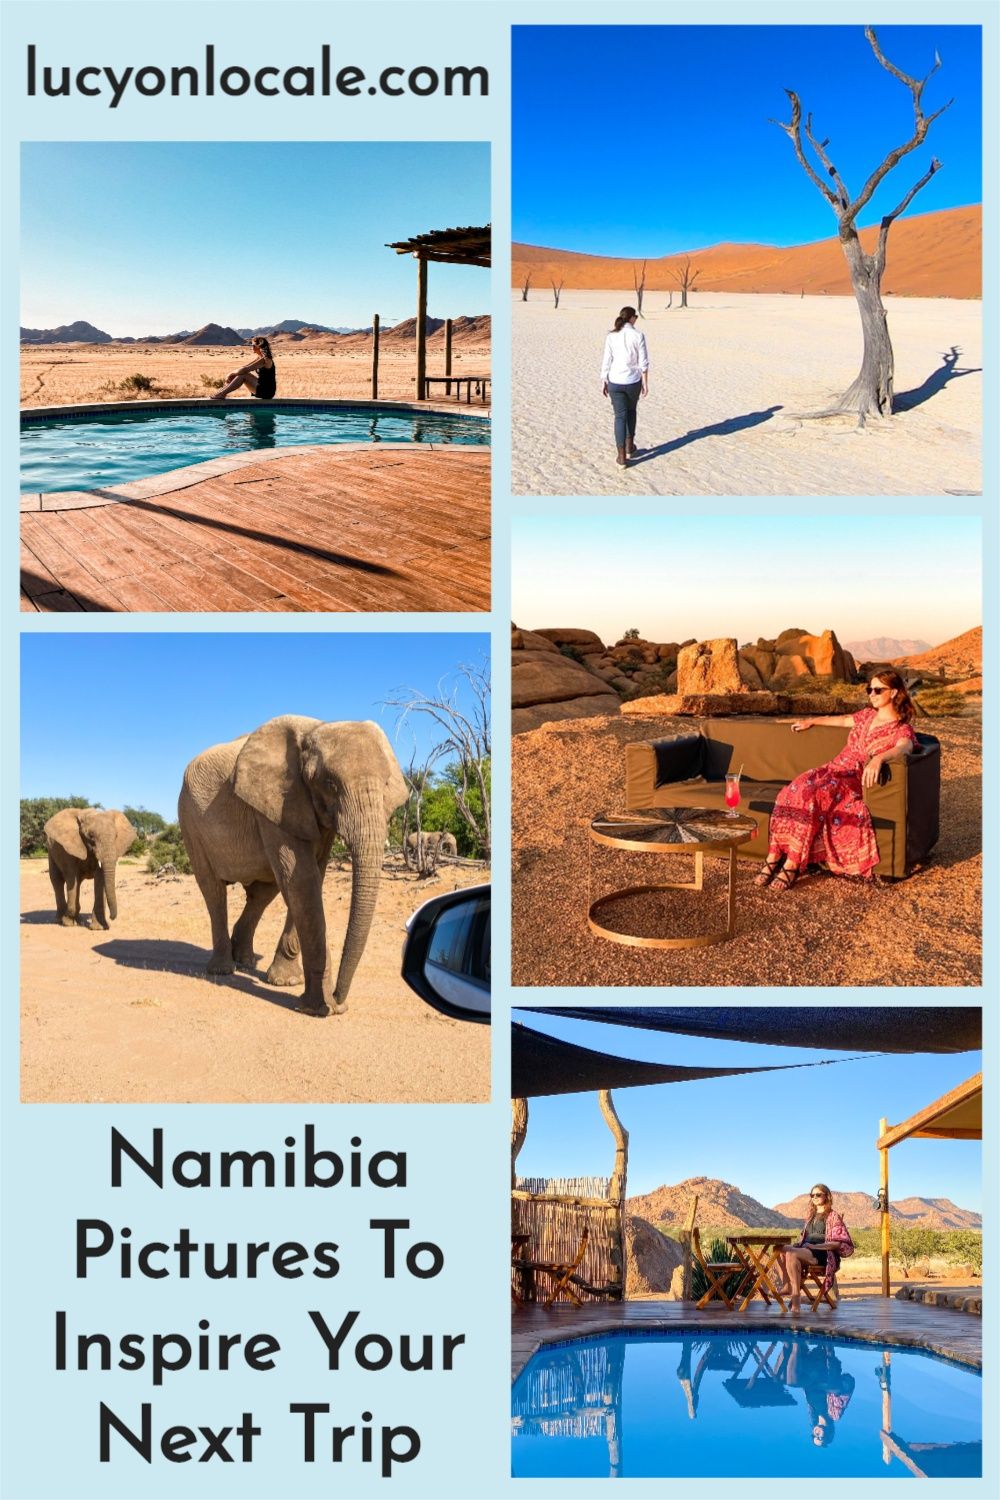 Namibia pictures to inspire your next trip